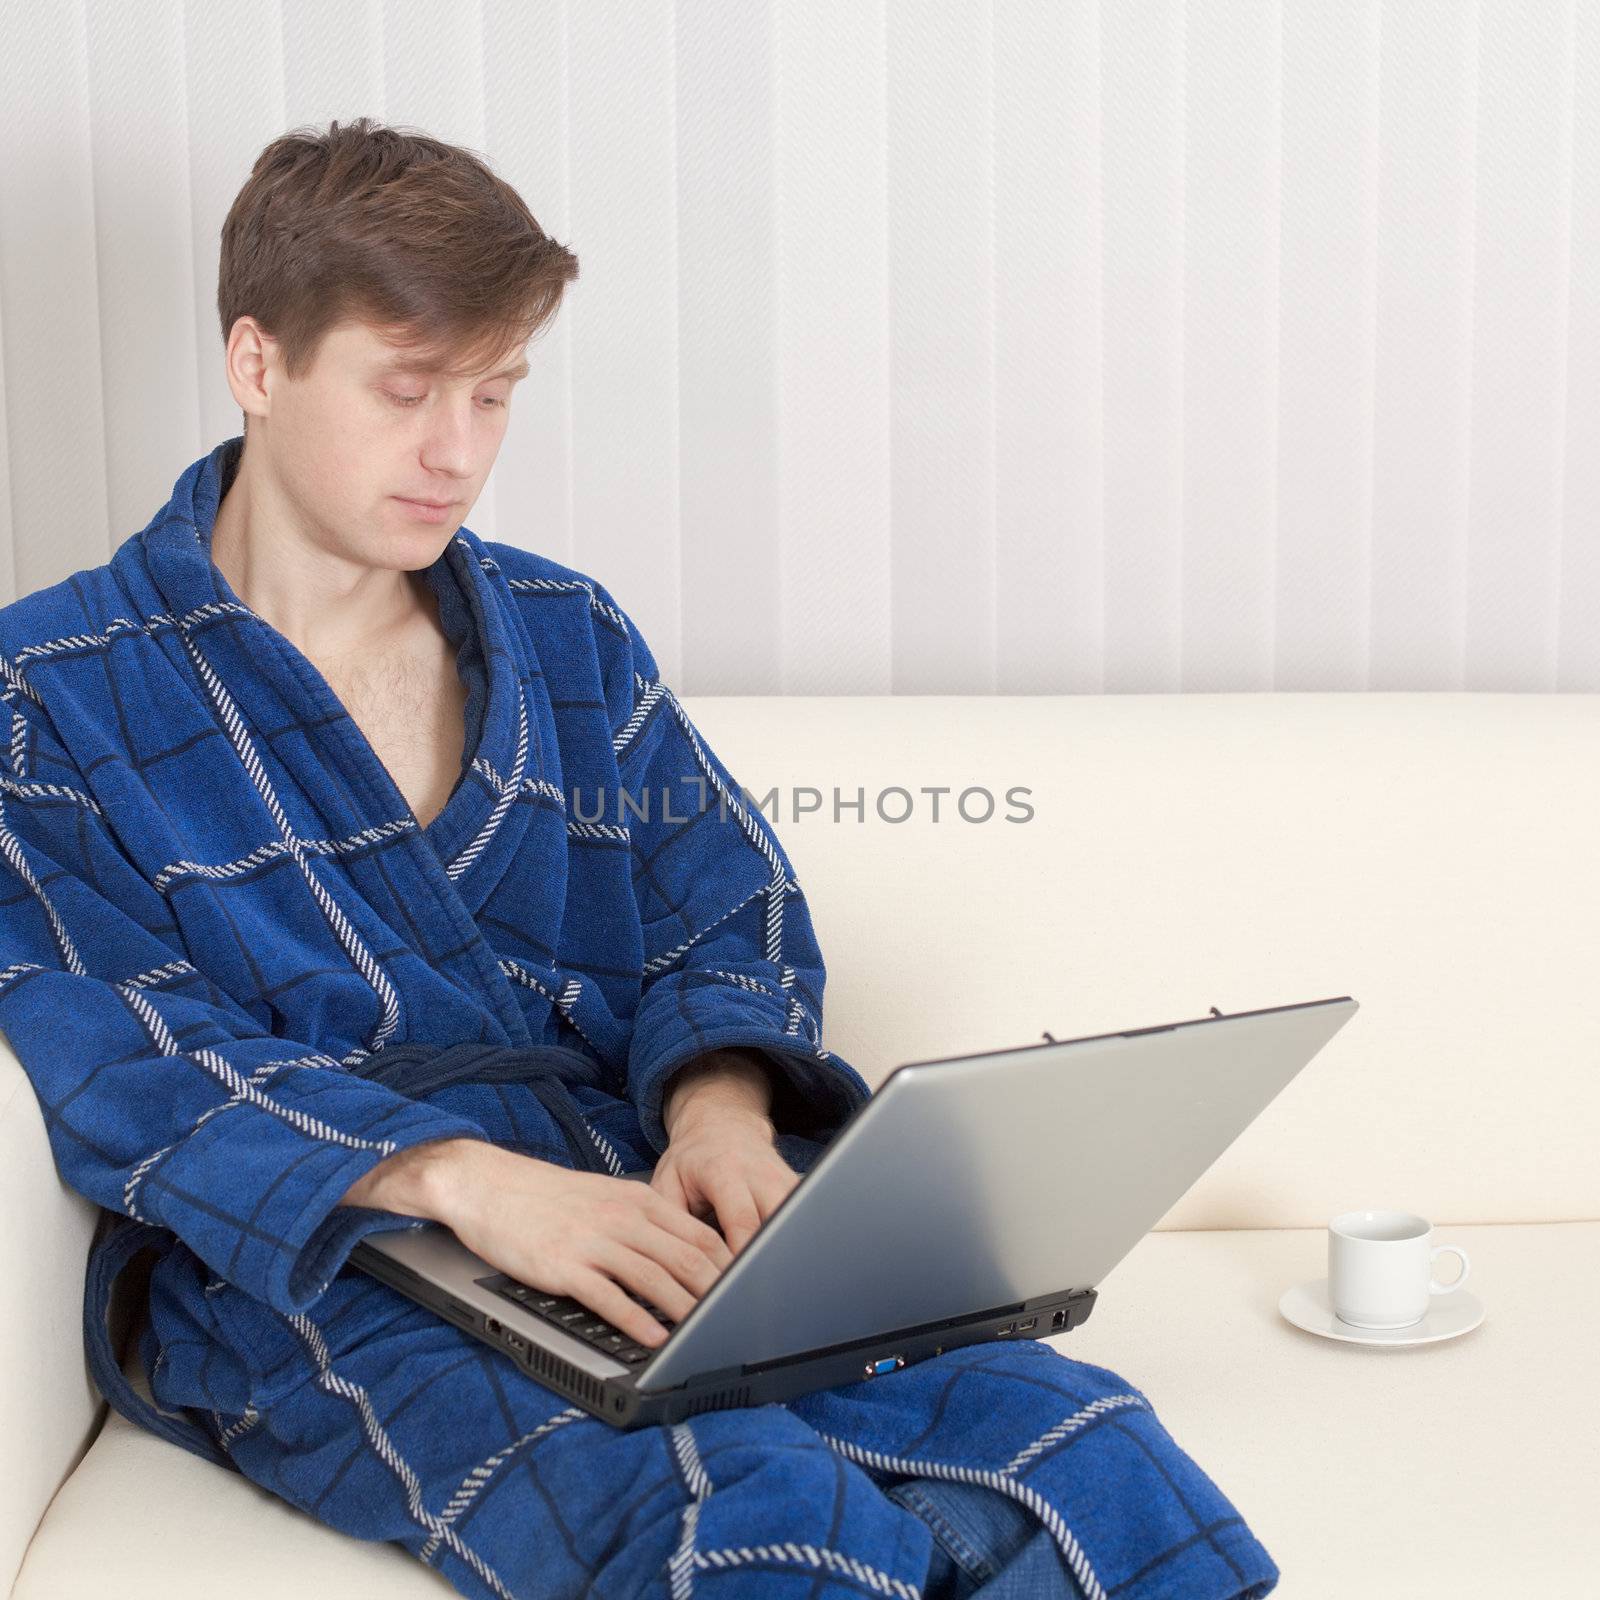 The young man in dressing gown with the laptop